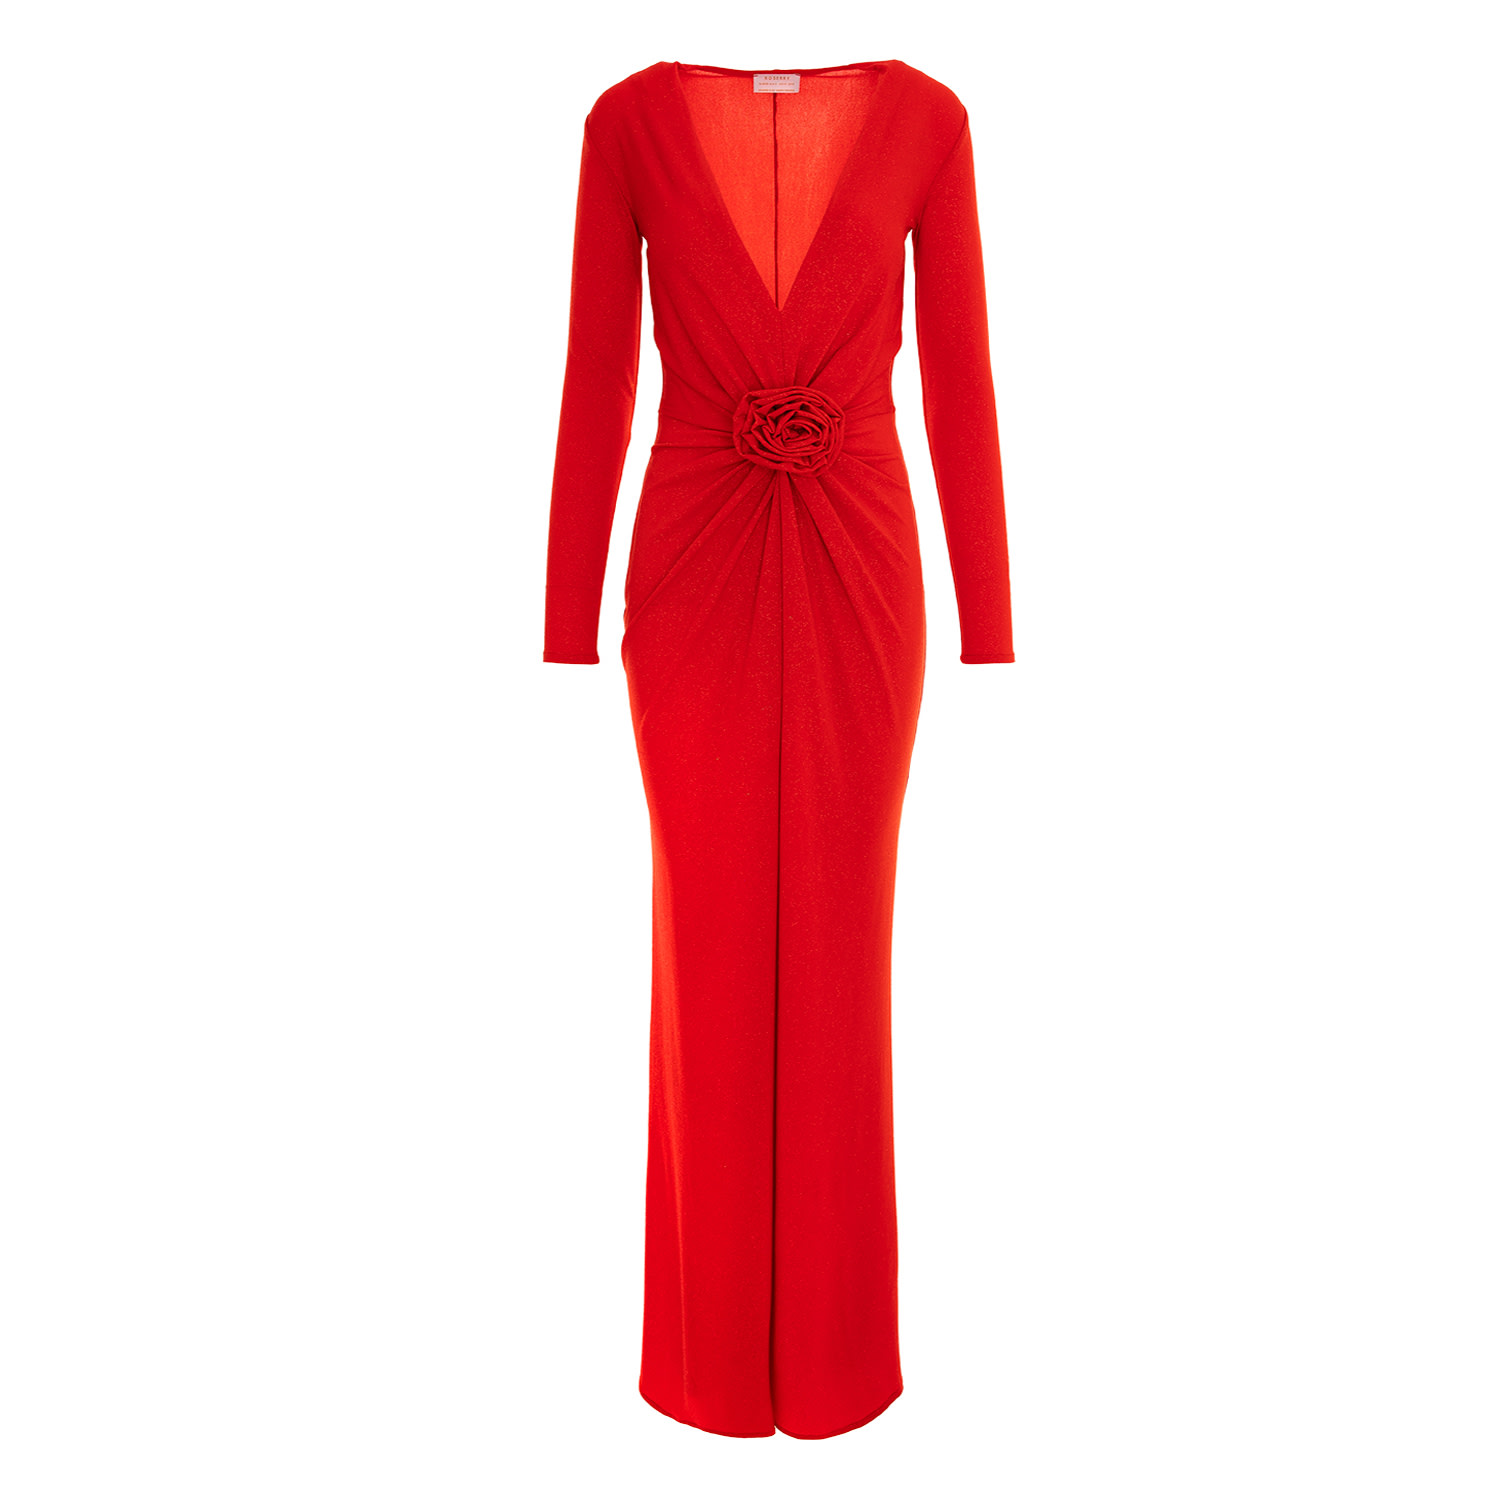 Women’s Mallorca Lurex Jersey Maxi Dress With Fixed Rosette Detail In Red Xs/S Roserry